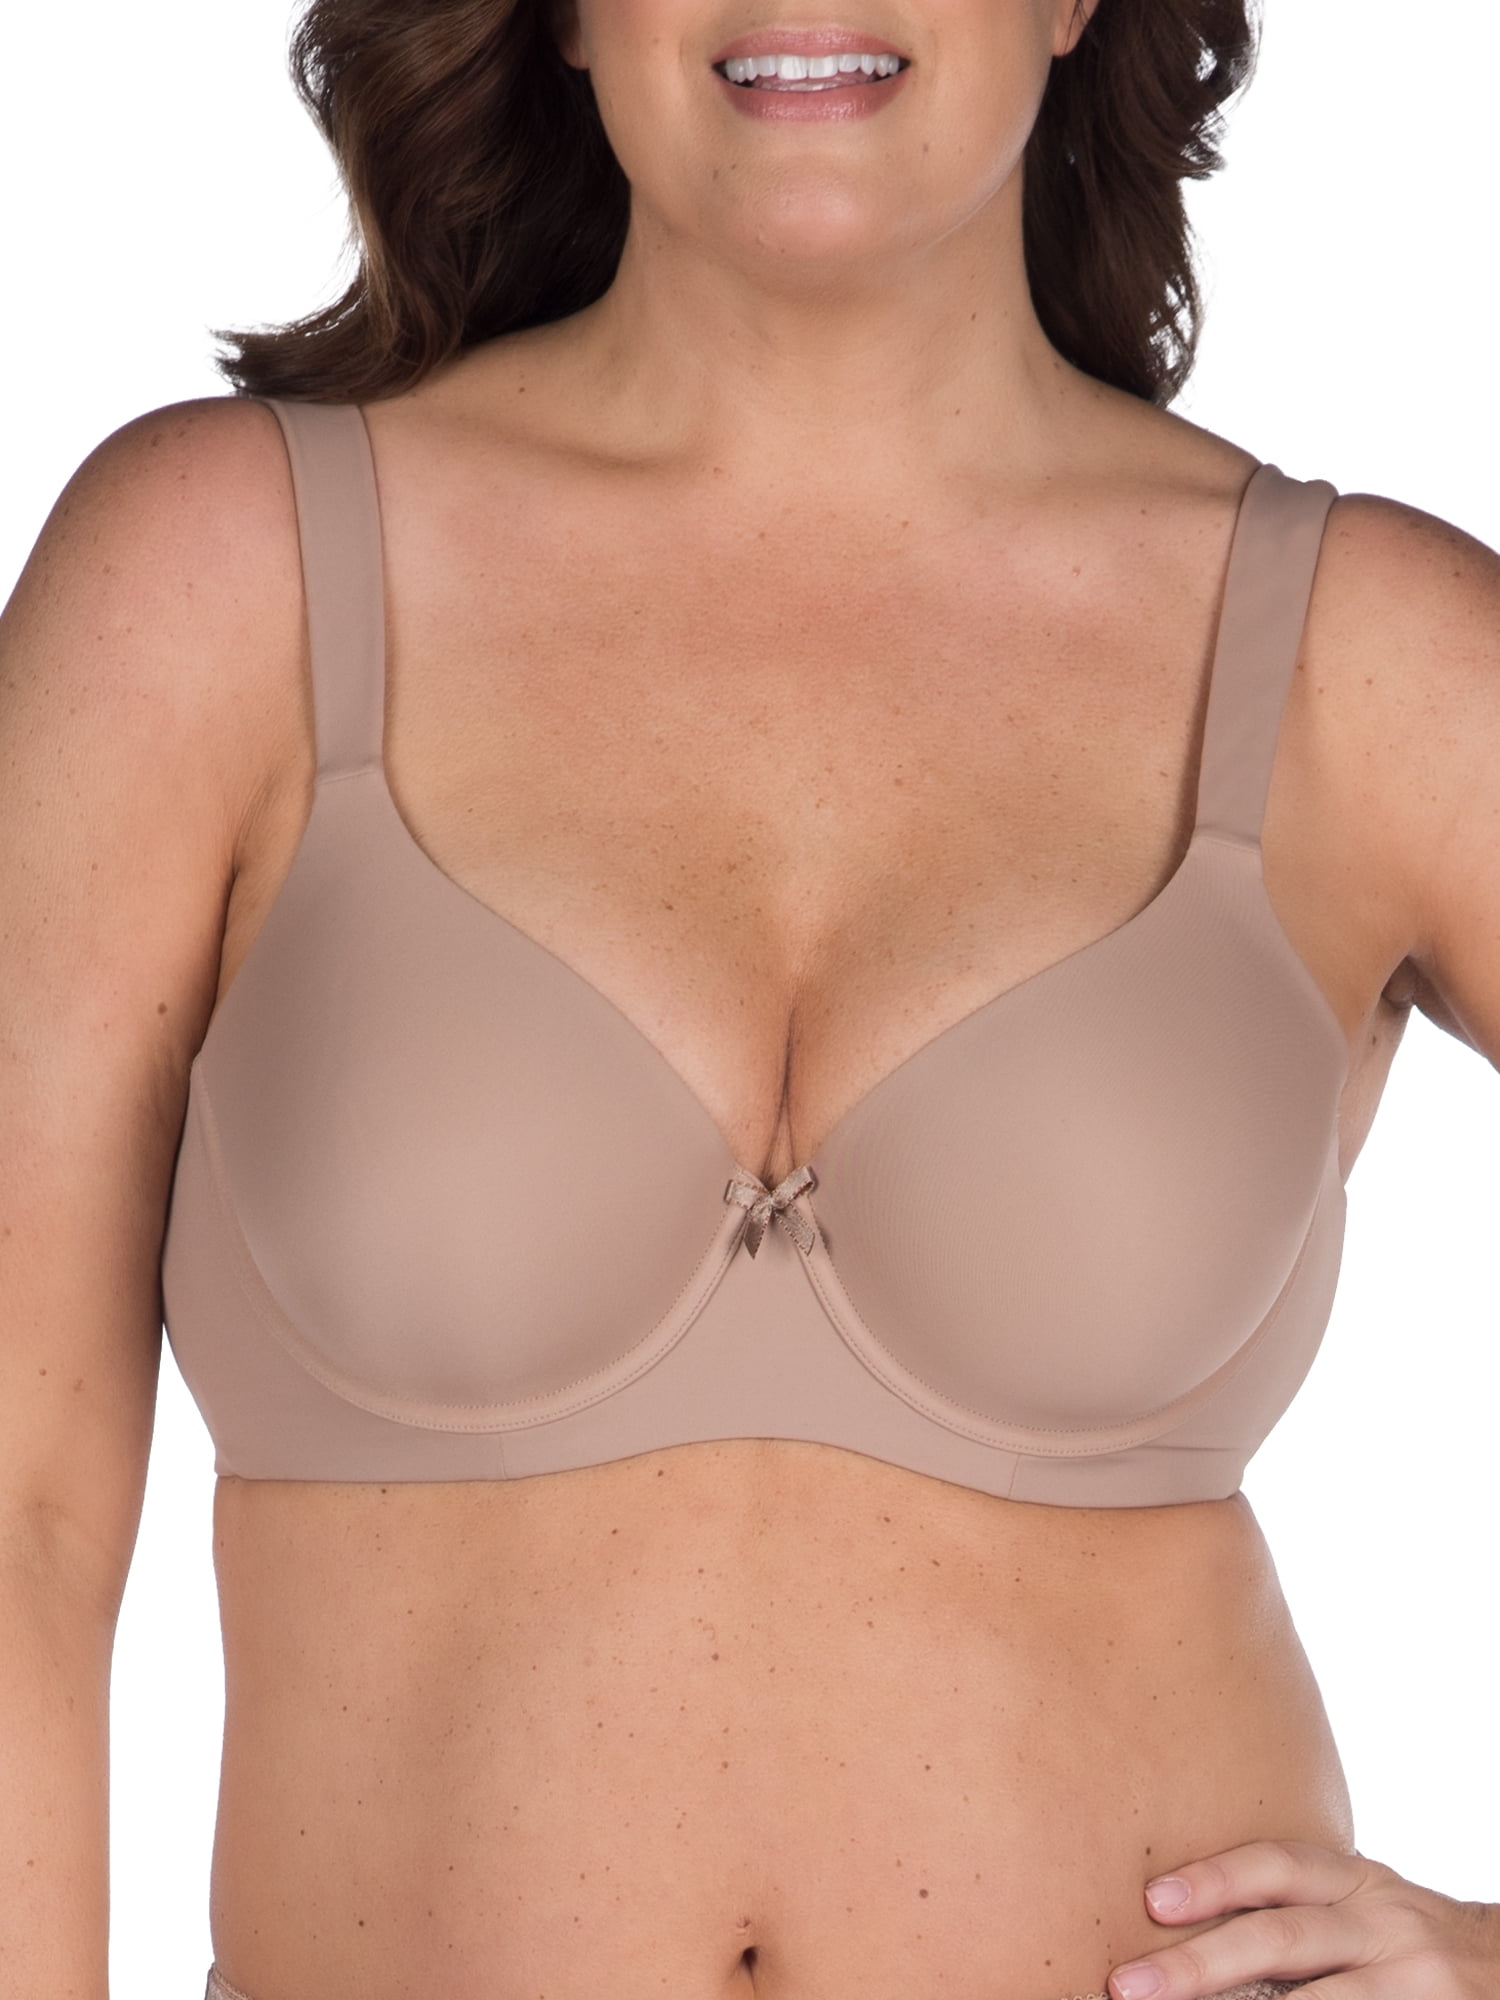 LEADING LADY The Brigitte Classic T-Shirt Wirefree Bra - Padded Bras for  Women - Womens Wireless T-Shirt Bras Plus Size. Bright White at   Women's Clothing store